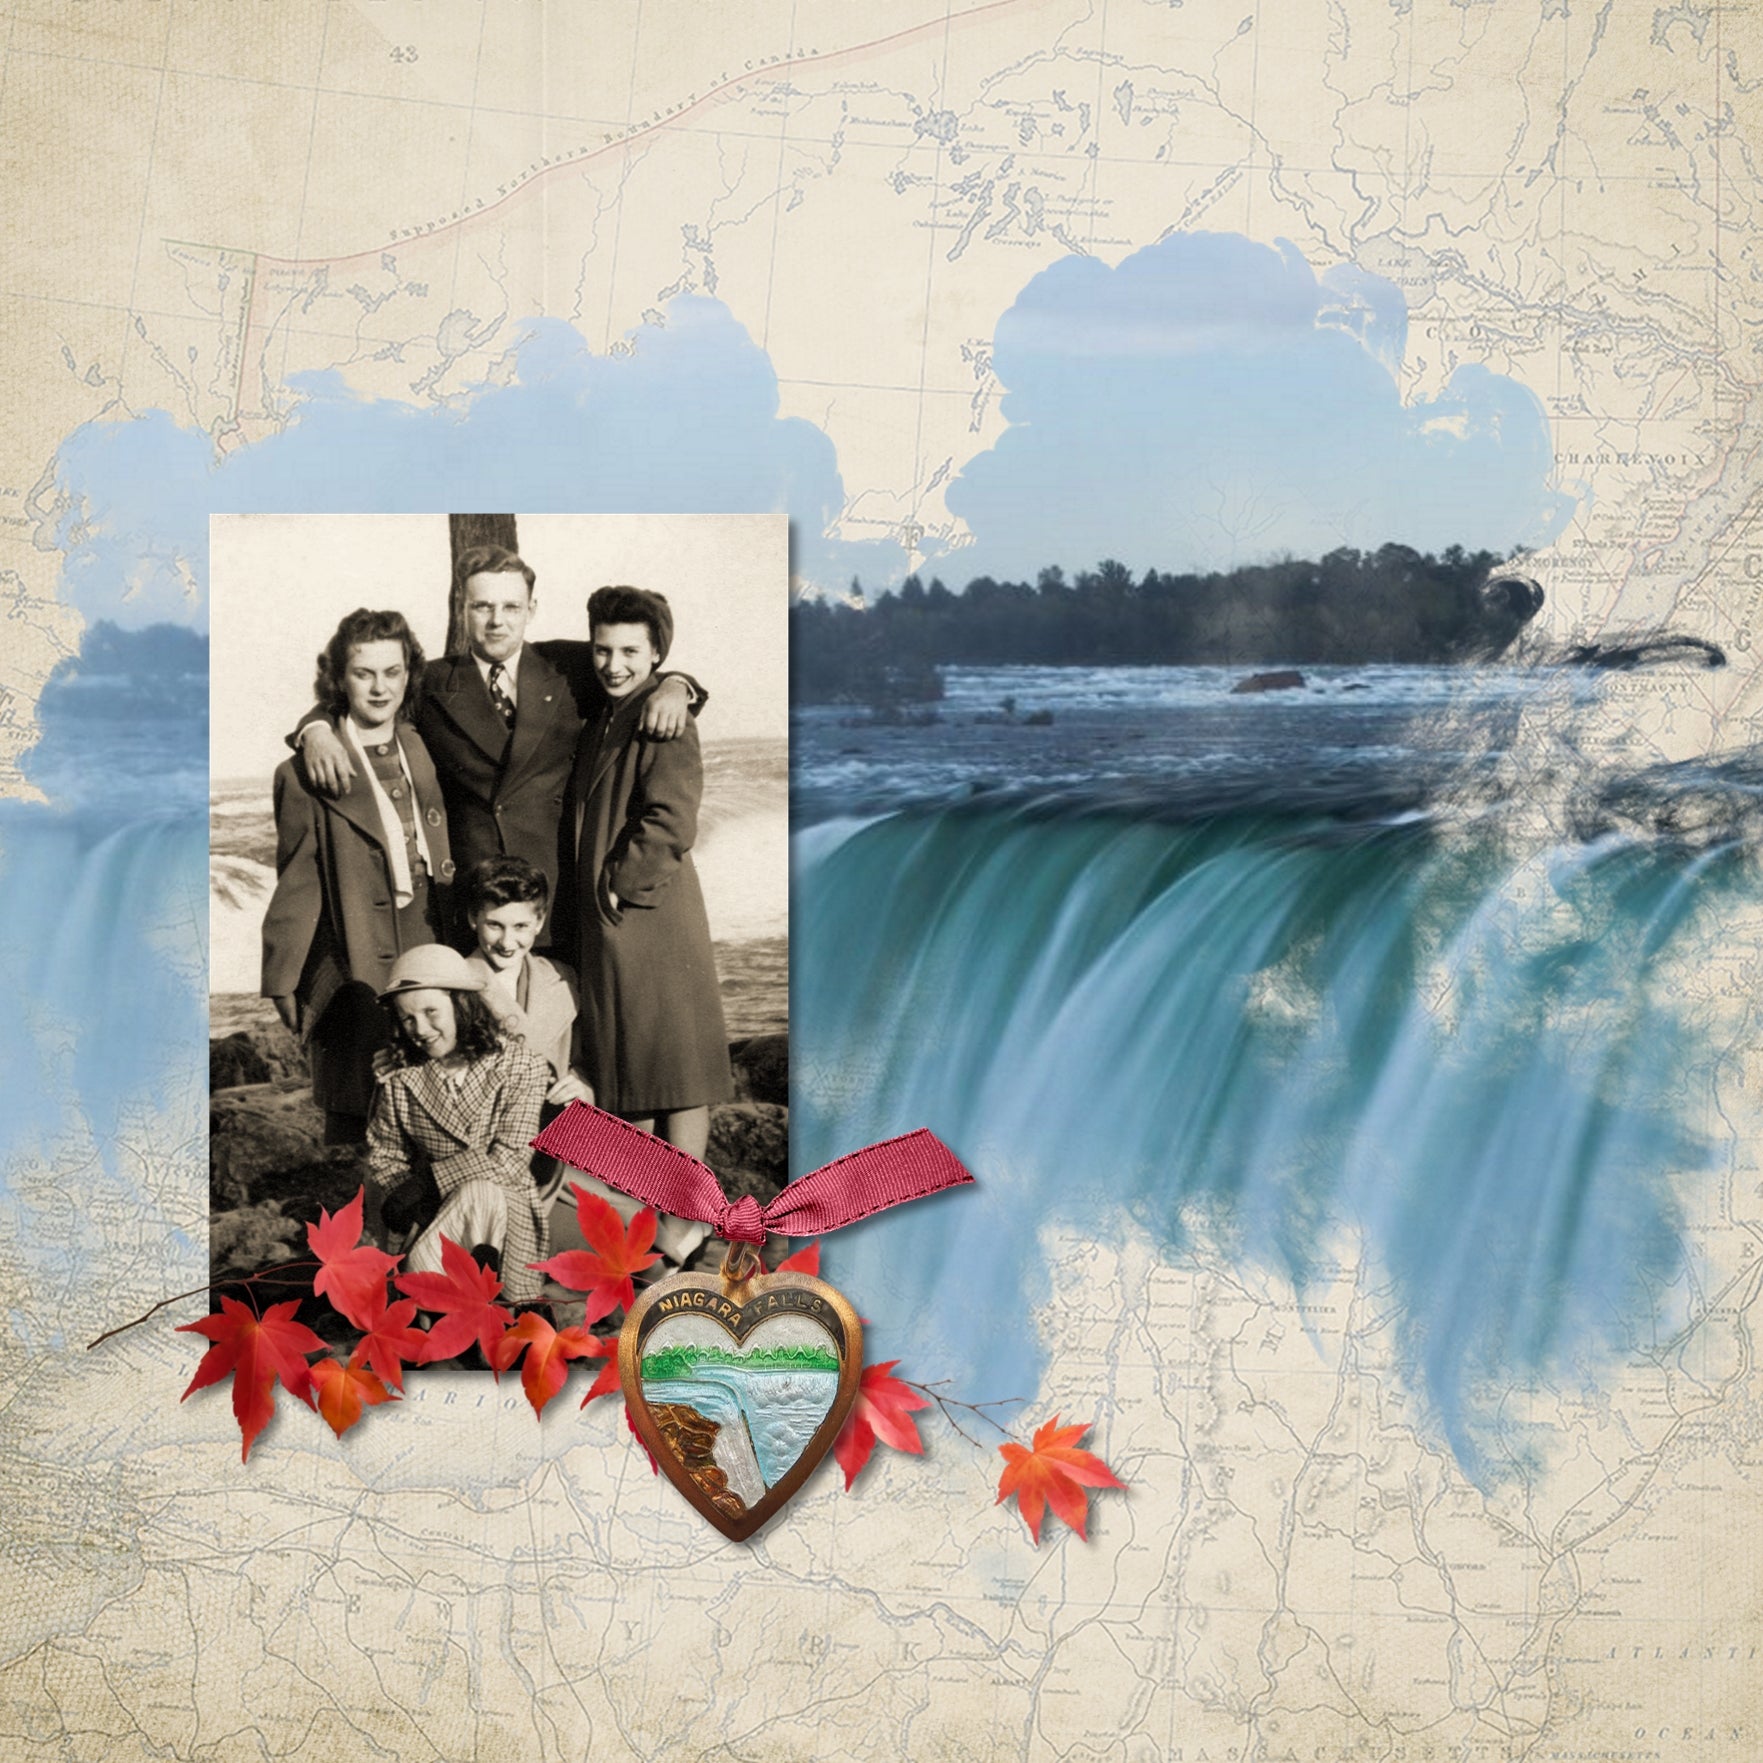 Celebrate your travel memories to Canada with these digital scrapbooking realistic embellishments by Lucky Girl Creative digital art great for Canadians, vacations to Canada, and family history and genealogy projects. Layer with your favorite photos and papers to create a warm and authentic scrapbooking look.